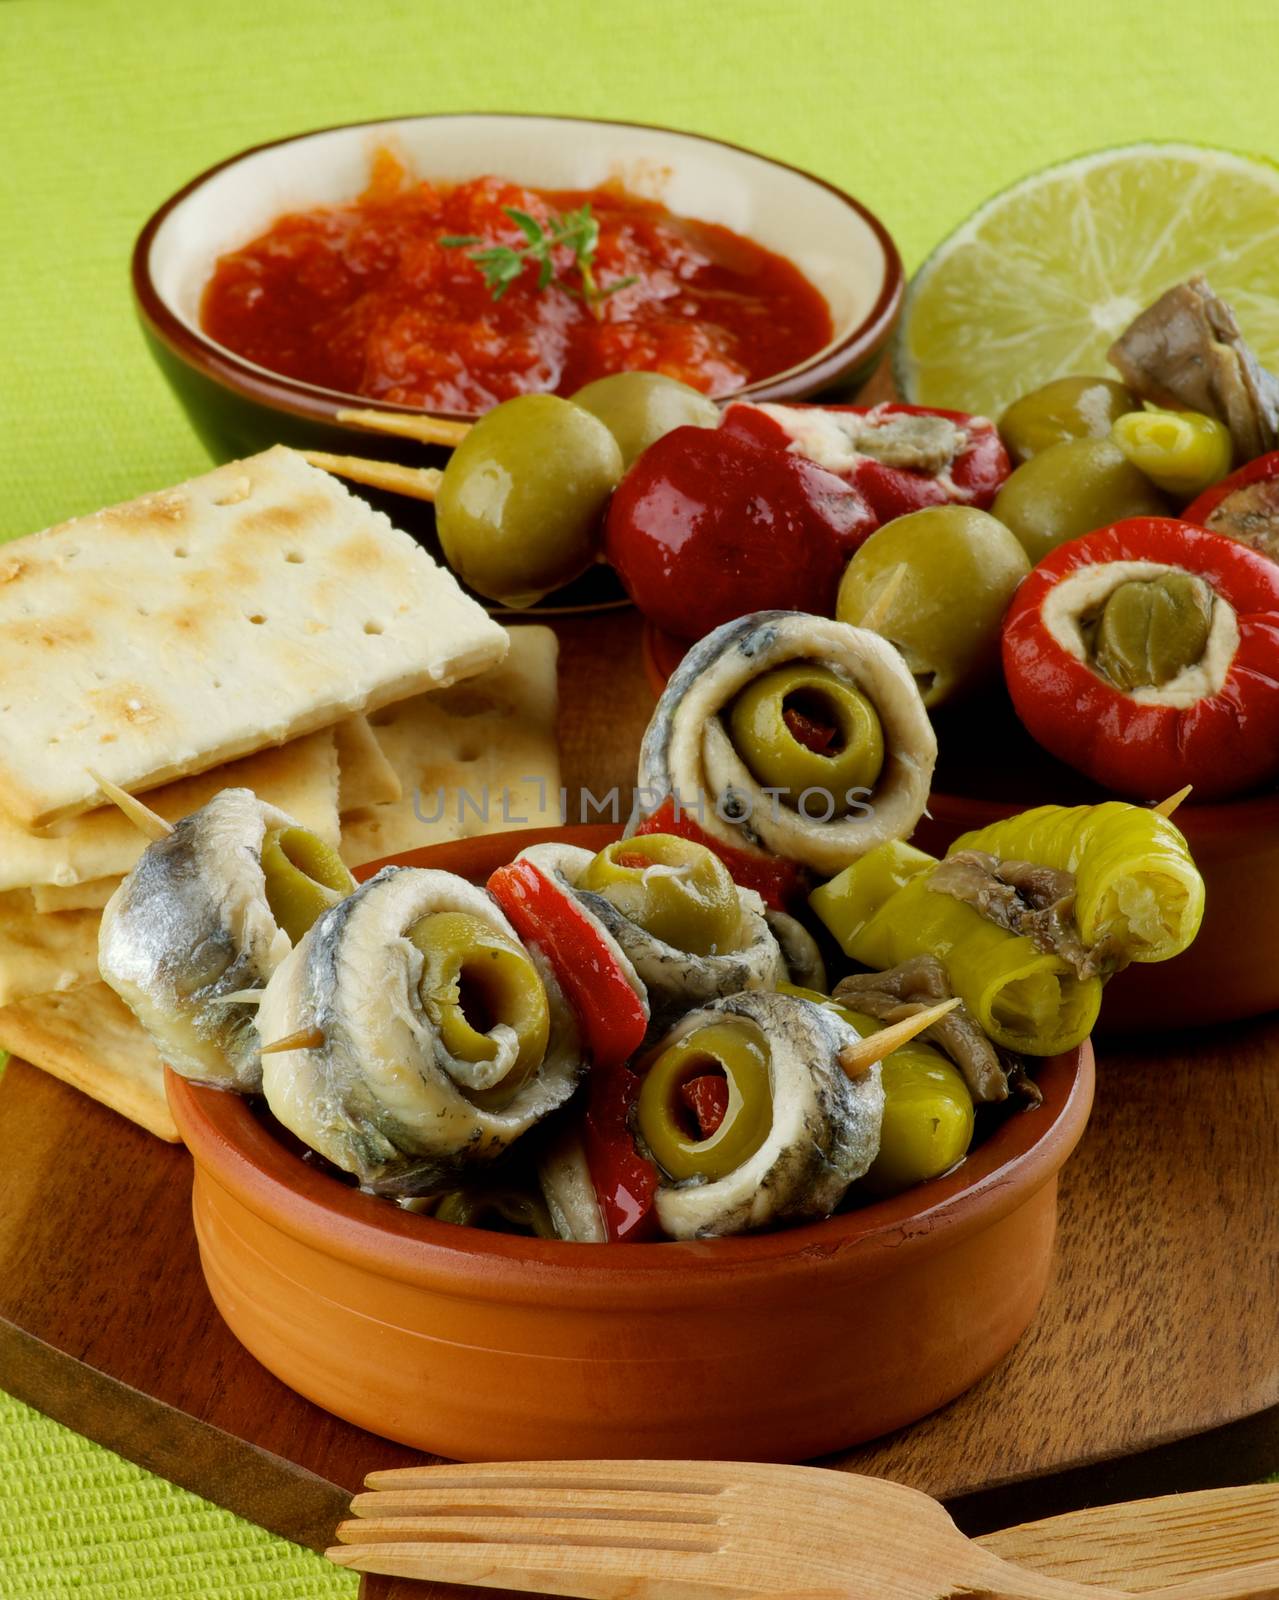 Delicious Spanish Snacks with Anchovies, Green Olives, Stuffed Small Peppers, Bread Sticks and Tomatoes Sauce in Various Bowls closeup on Green Napkin